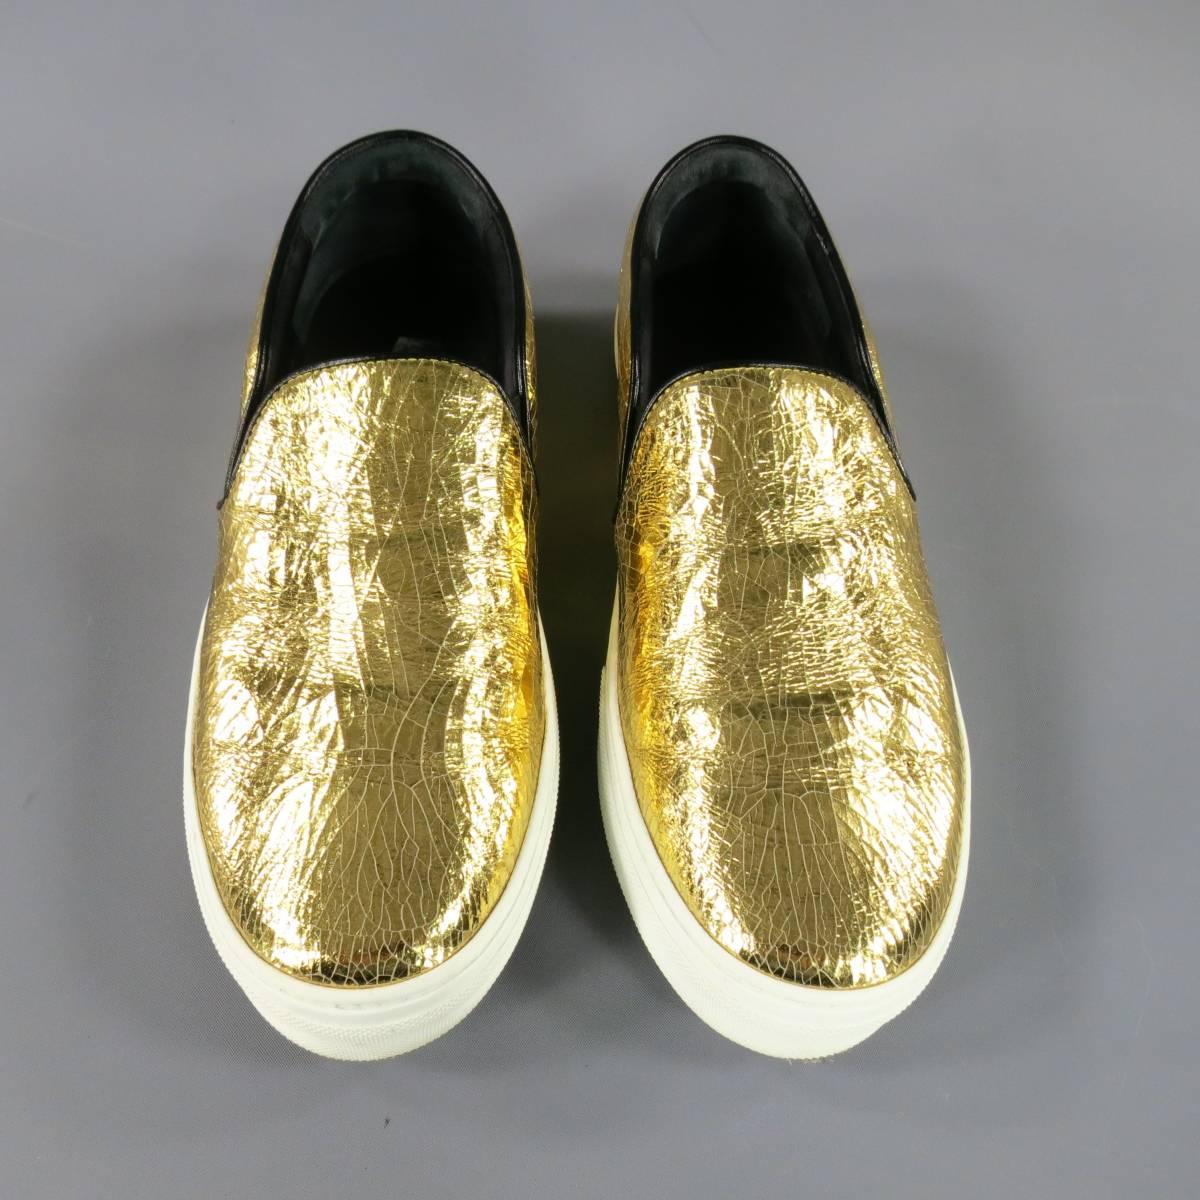 CELINE Size 10 Metallic Gold Crackle Leather Slip On Sneakers 2